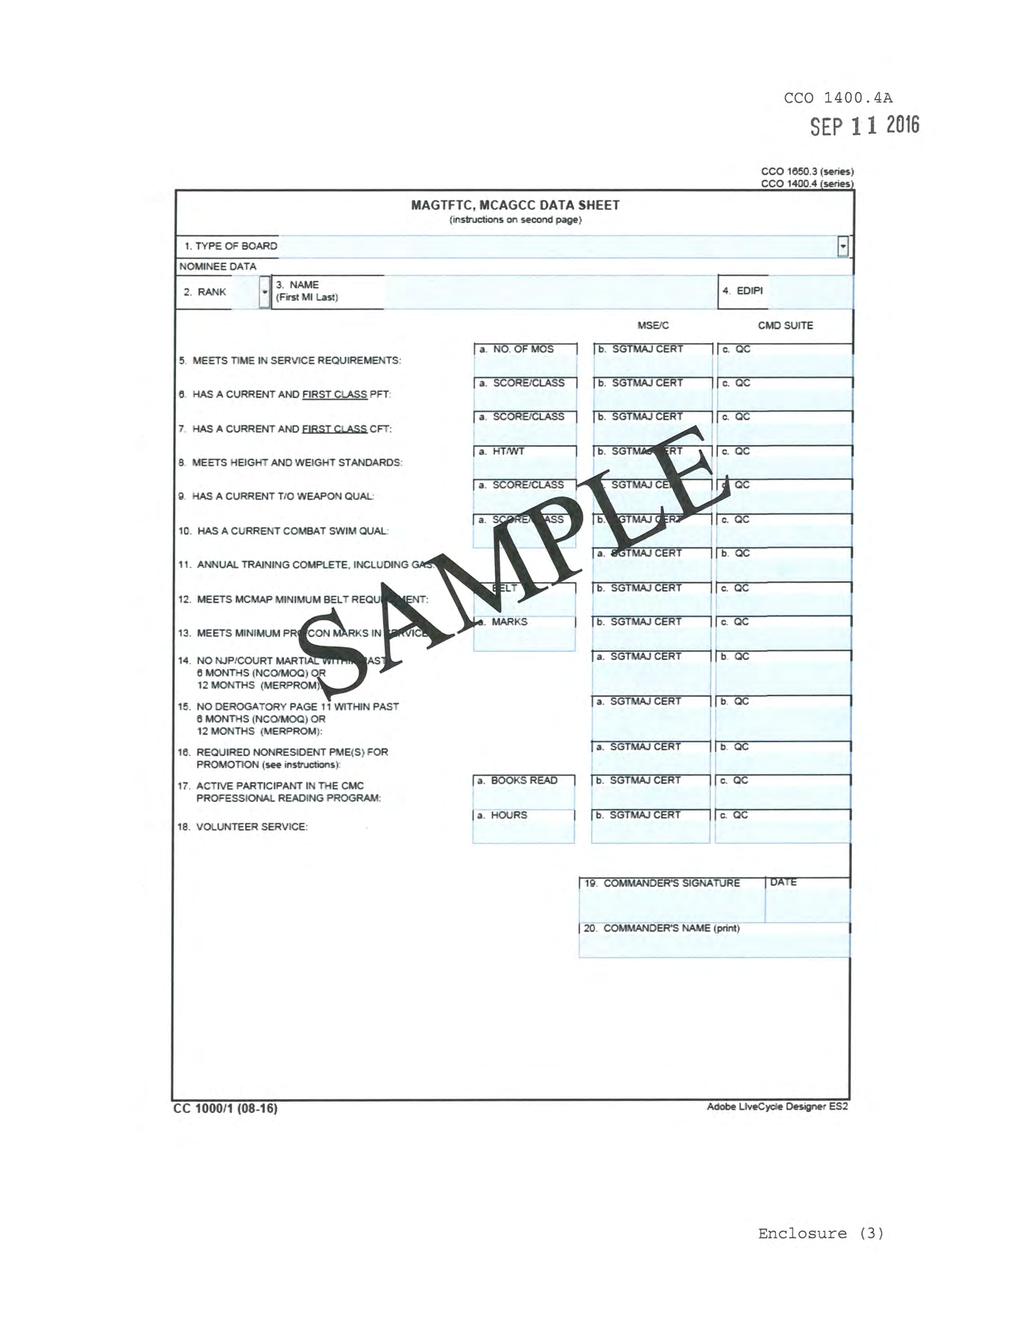 CCO 1400.4A MAGTFTC, MCAGCC DATA SHEET (instructions on second page> CCO 1650.3 (series) CCO 1400.4 series 1. TYPE Of BOARD NOMINEE DATA 2. RANK -s-~f-. irst-n-~-ie_last ) - -- ----------------- - 14.